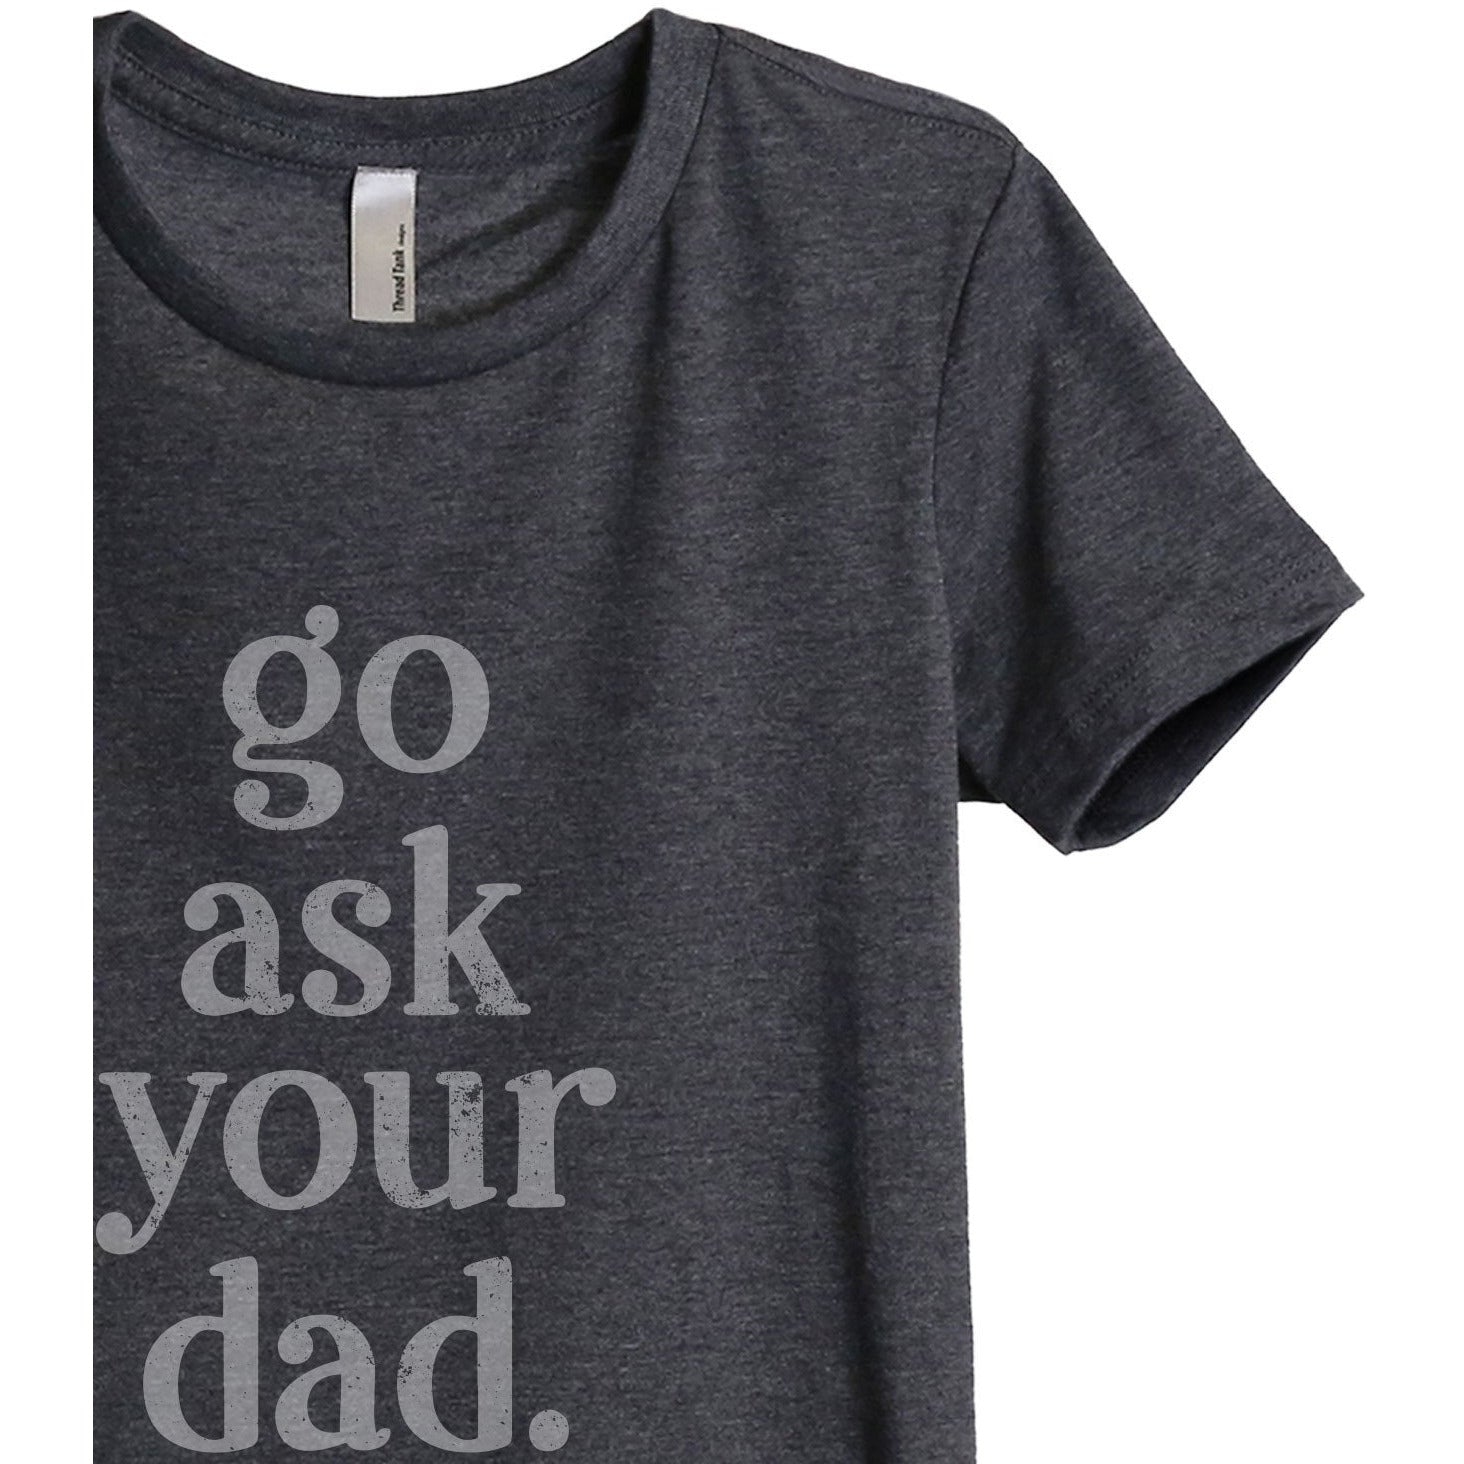 Go Ask Your Dad Women's Relaxed Crewneck T-Shirt Top Tee Charcoal Grey
